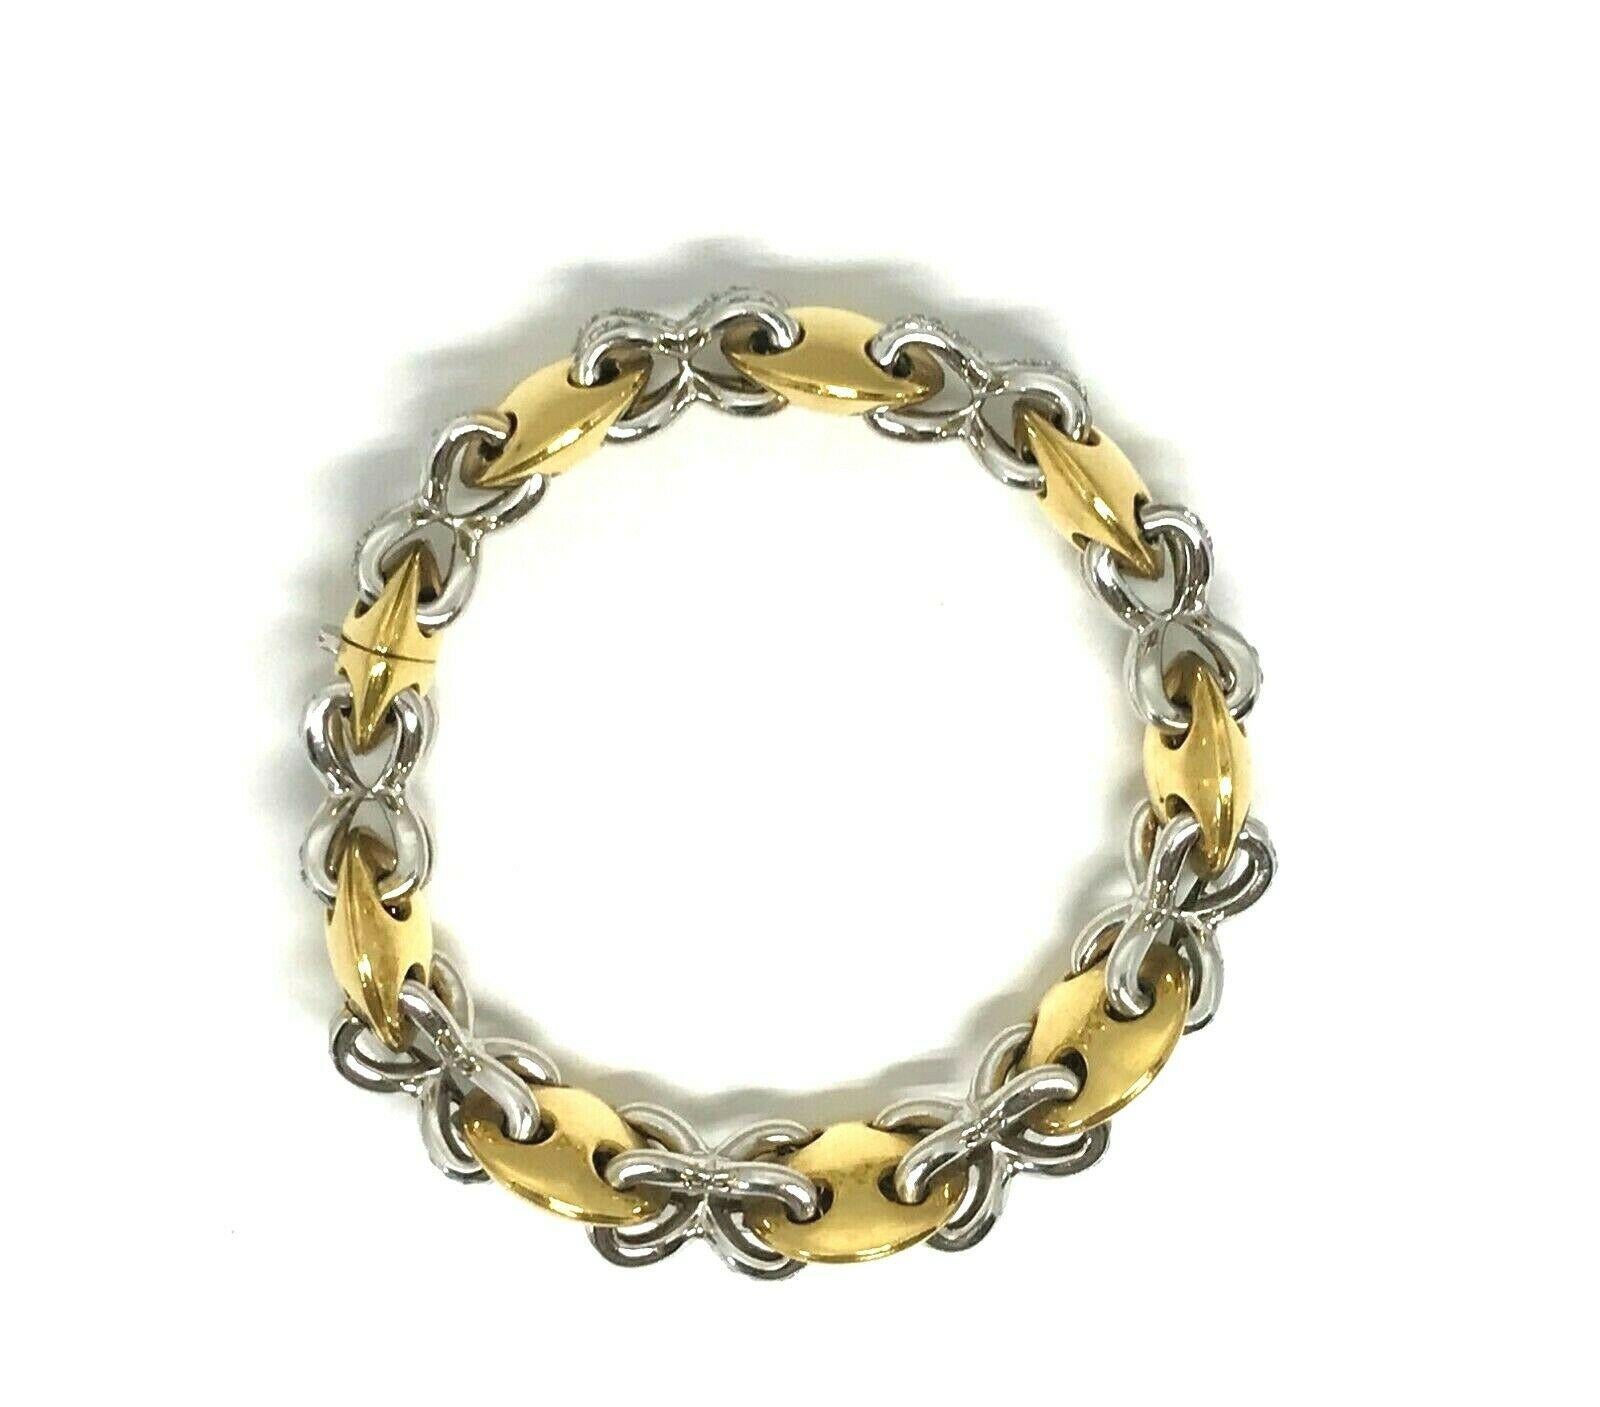 Vintage (c. 1980s) 18k gold and diamond bracelet. Made of 18k yellow gold convex lens shapes connected by 18k white gold and diamond links. Diamonds are round brilliant cut, G-H color, VS1 clarity. Total carat weight is approximately 3.60 cts.